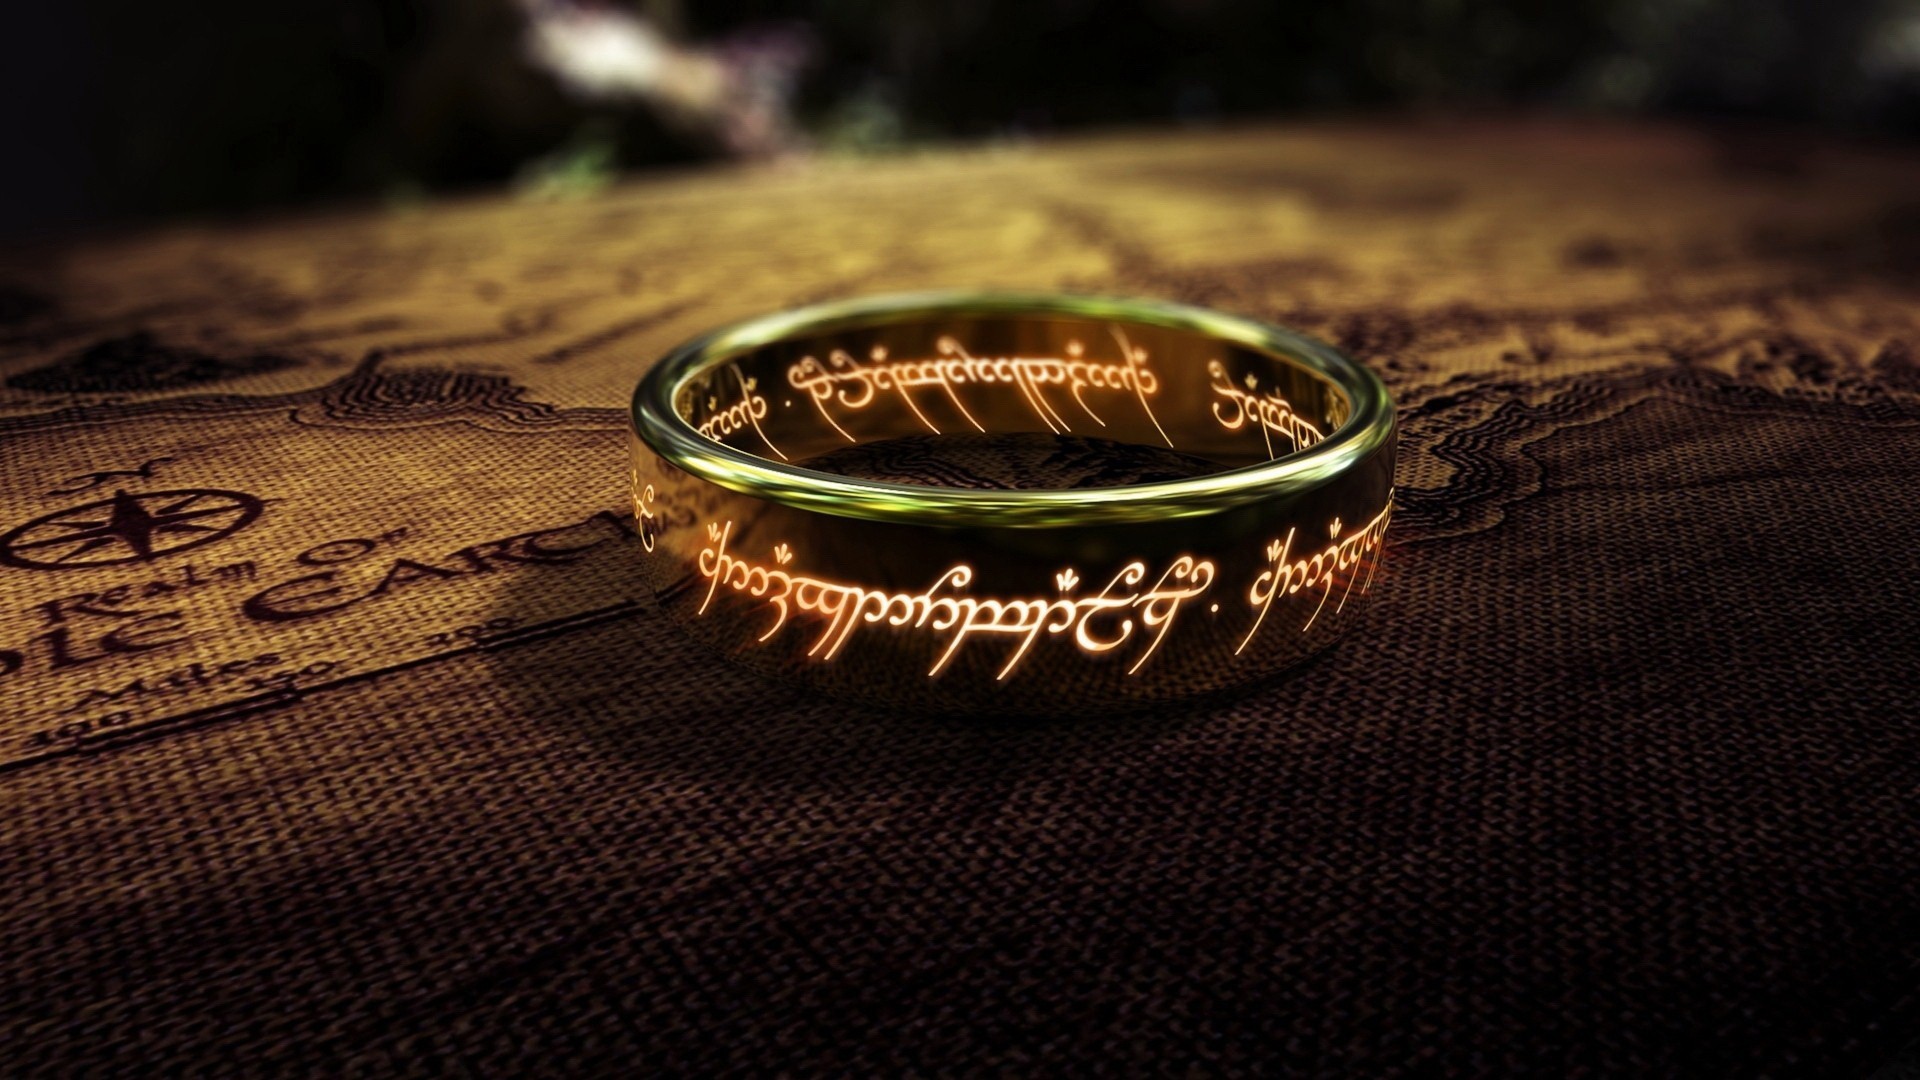 one-ring-the-lord-of-the-rings-movie-hd-wallpaper-1920x1080-4714.jpg